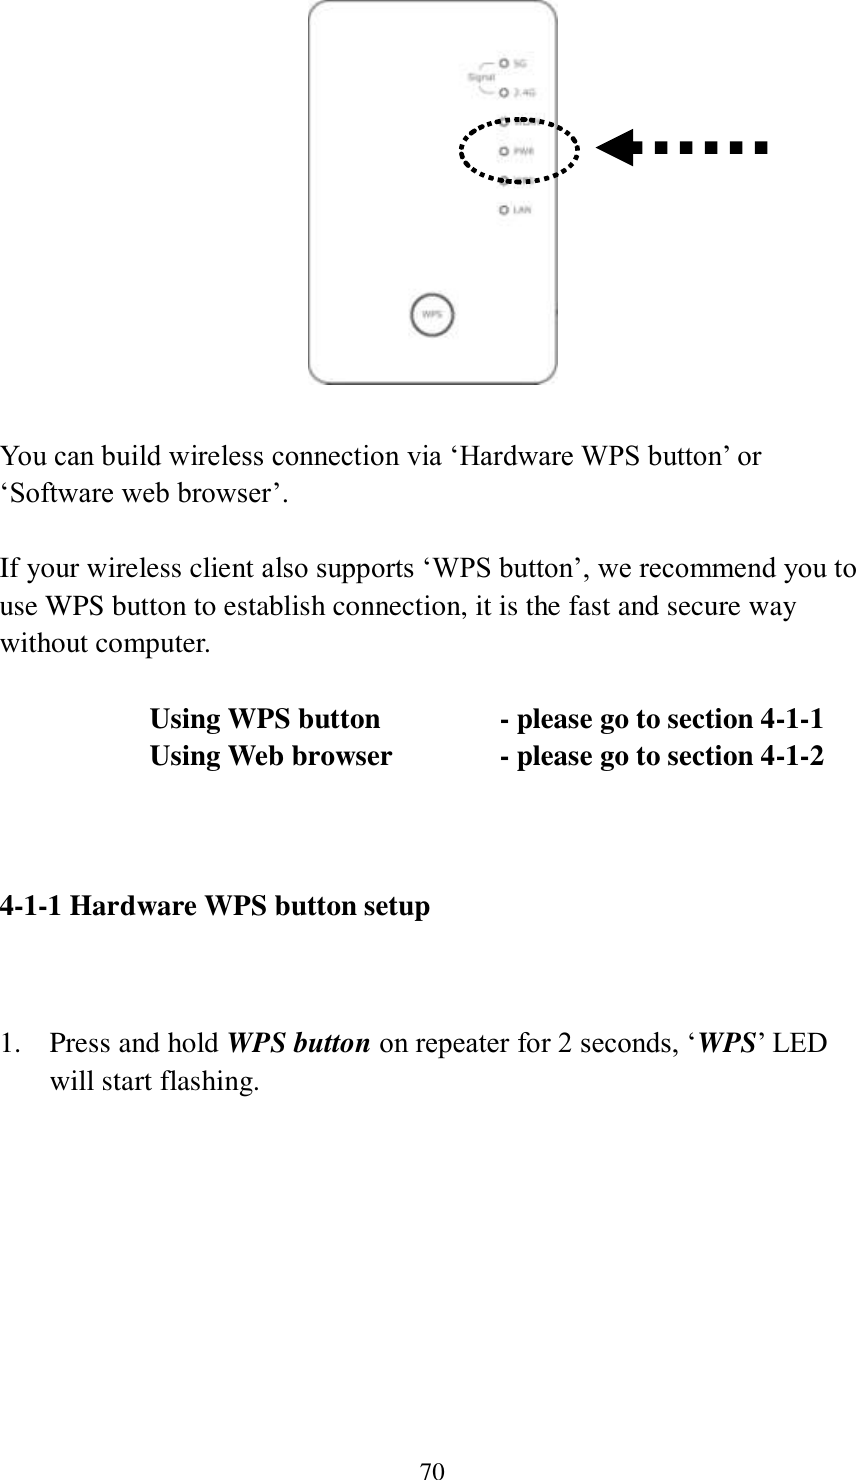 70   You can build wireless connection via ‘Hardware WPS button’ or ‘Software web browser’.  If your wireless client also supports ‘WPS button’, we recommend you to use WPS button to establish connection, it is the fast and secure way without computer.    Using WPS button      - please go to section 4-1-1       Using Web browser     - please go to section 4-1-2    4-1-1 Hardware WPS button setup   1. Press and hold WPS button on repeater for 2 seconds, ‘WPS’ LED will start flashing.  